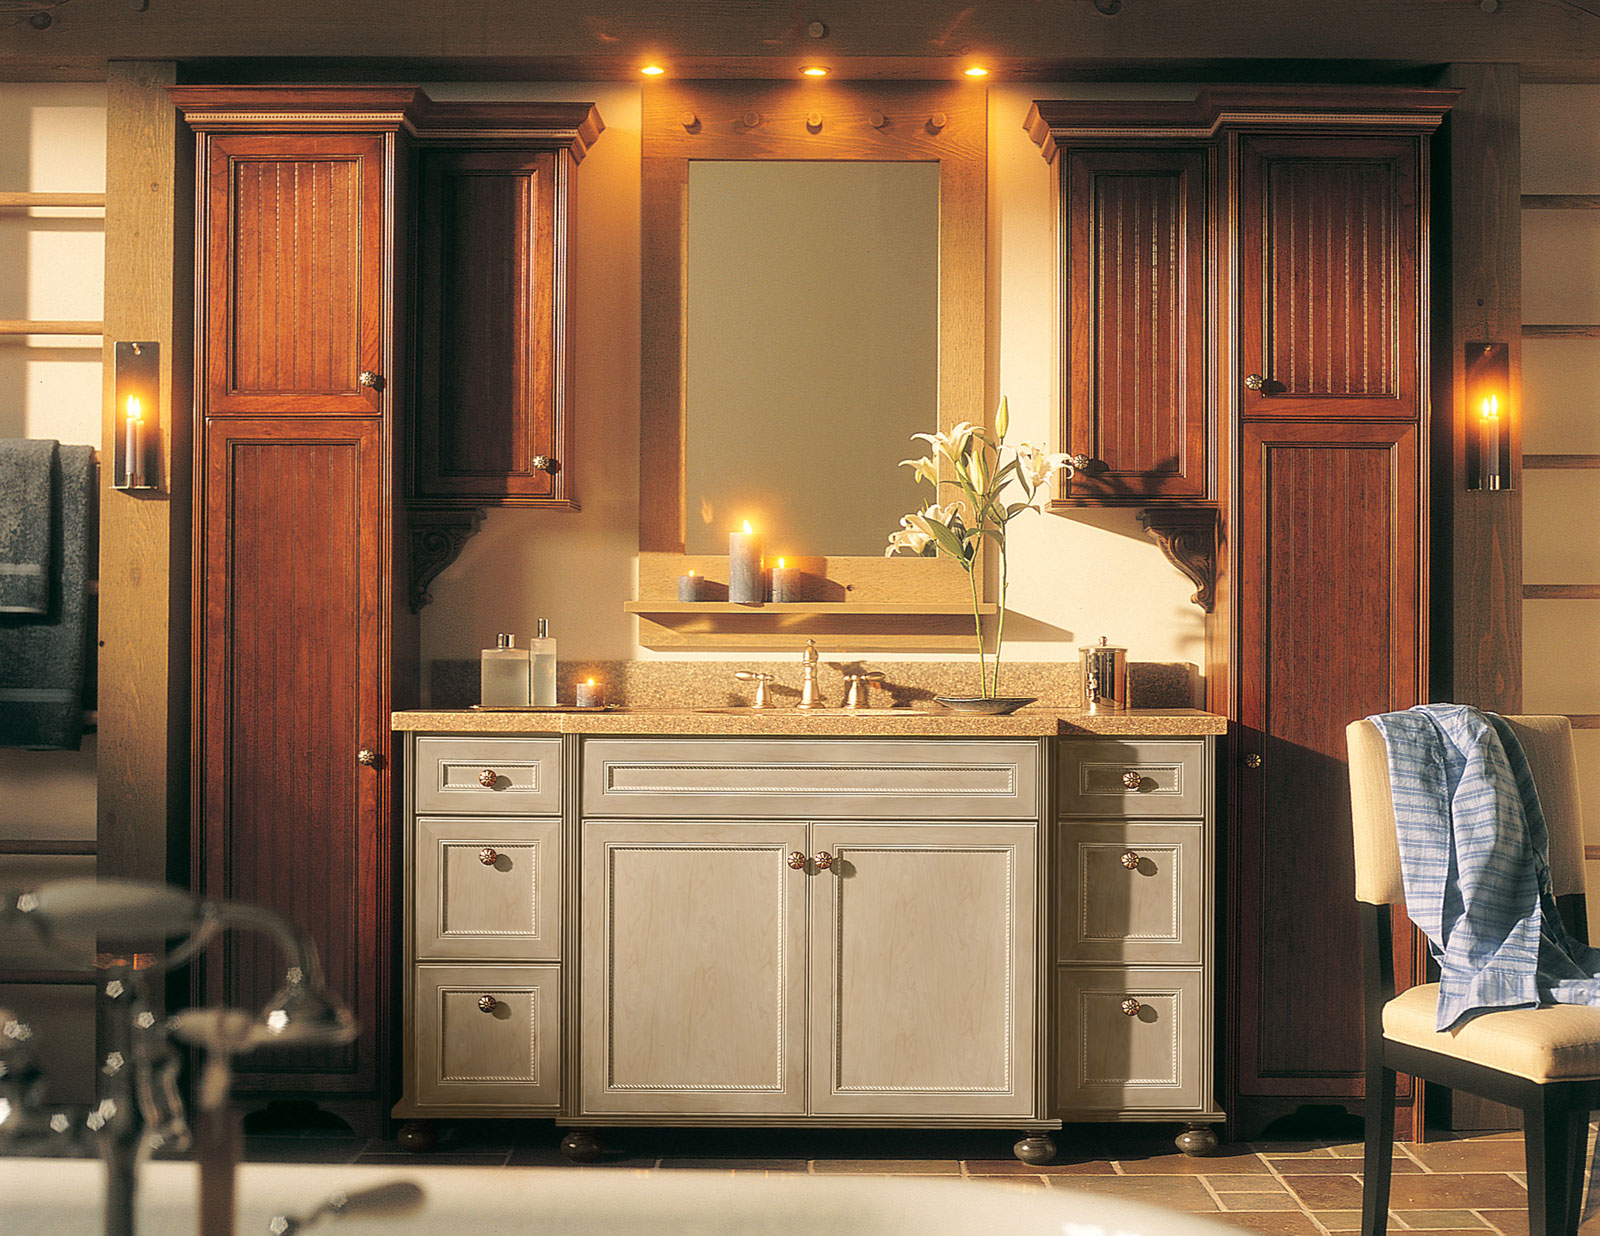 Bathroom Vanity Traditional Traditional Bathroom Vanity In White Traditional Vanity Made From Wooden Material Using Beige Marble Countertop Ideas Bathroom Bathroom Vanity Lighting Covered In Maximum Aesthetic